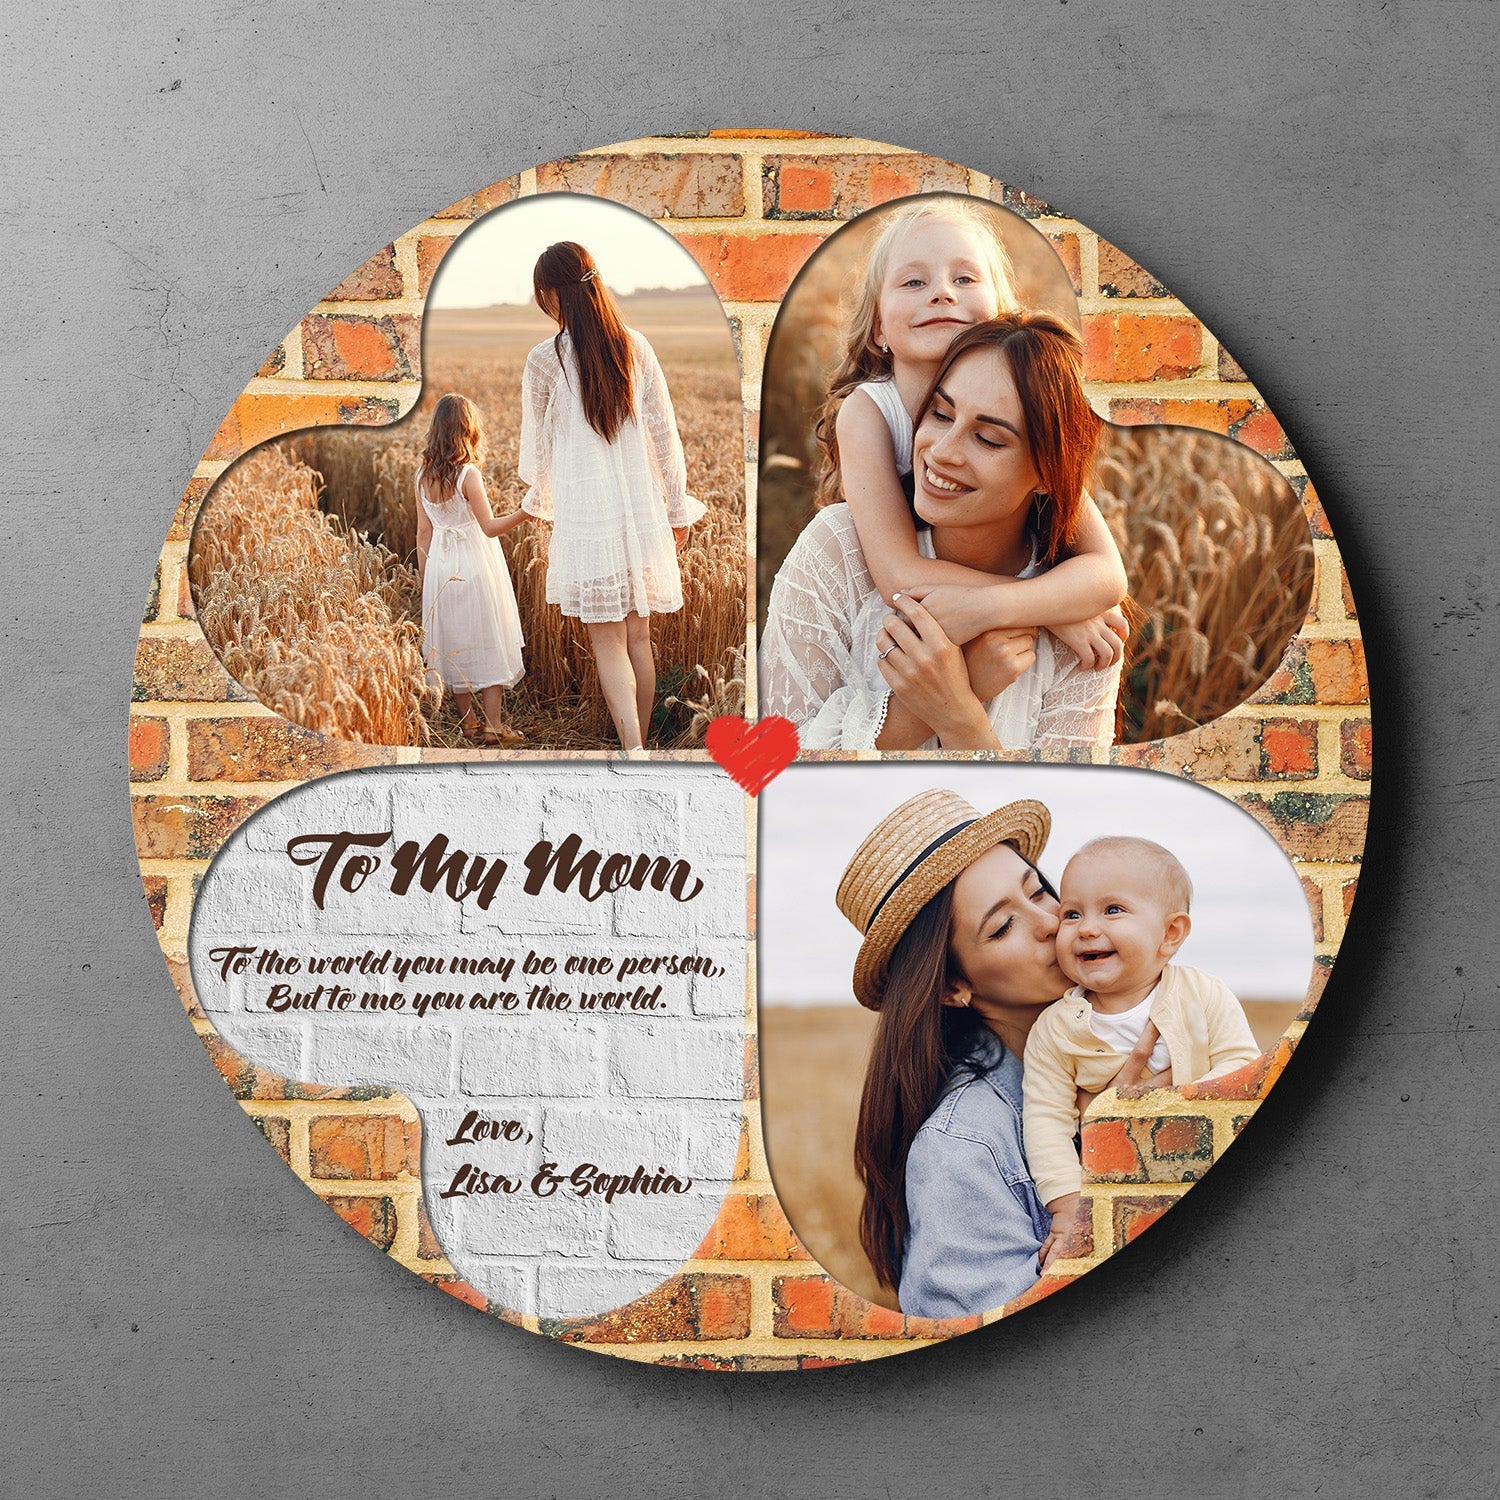 Custom Photo, Four-leaf clover, Personalized Name And Text, Round Wood Sign